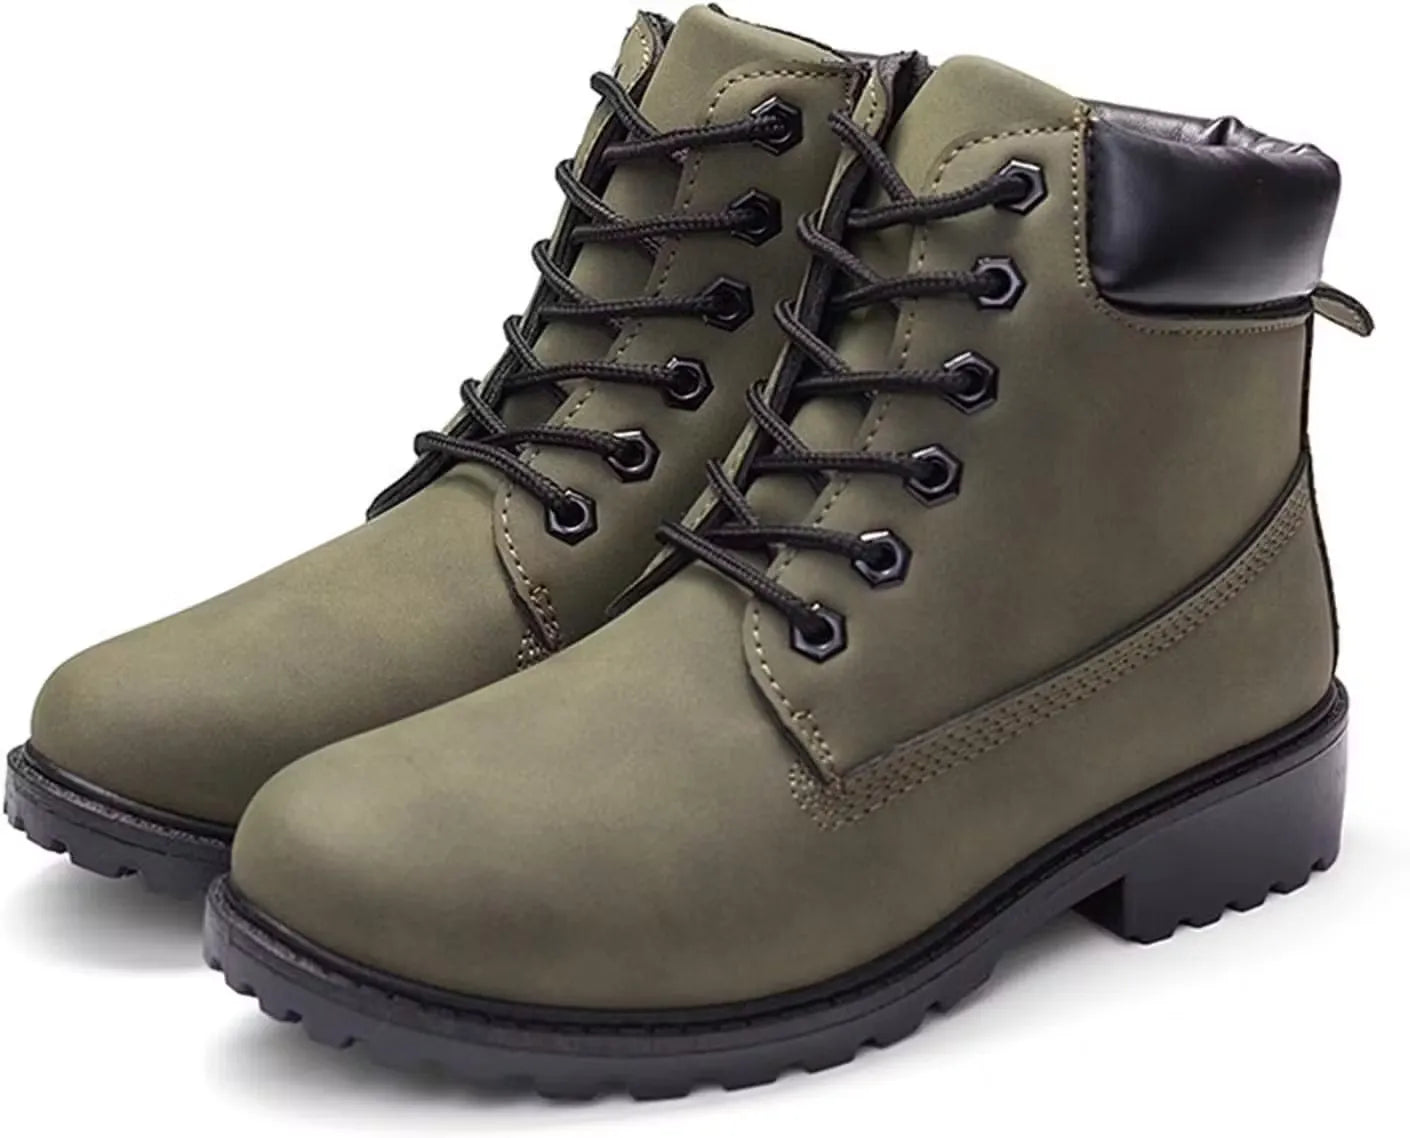 Green women's fashion ankle boots featuring warm lining for comfort and style. Ideal for winter wear or adding a touch of color to any outfit. Shop Dubailisit!